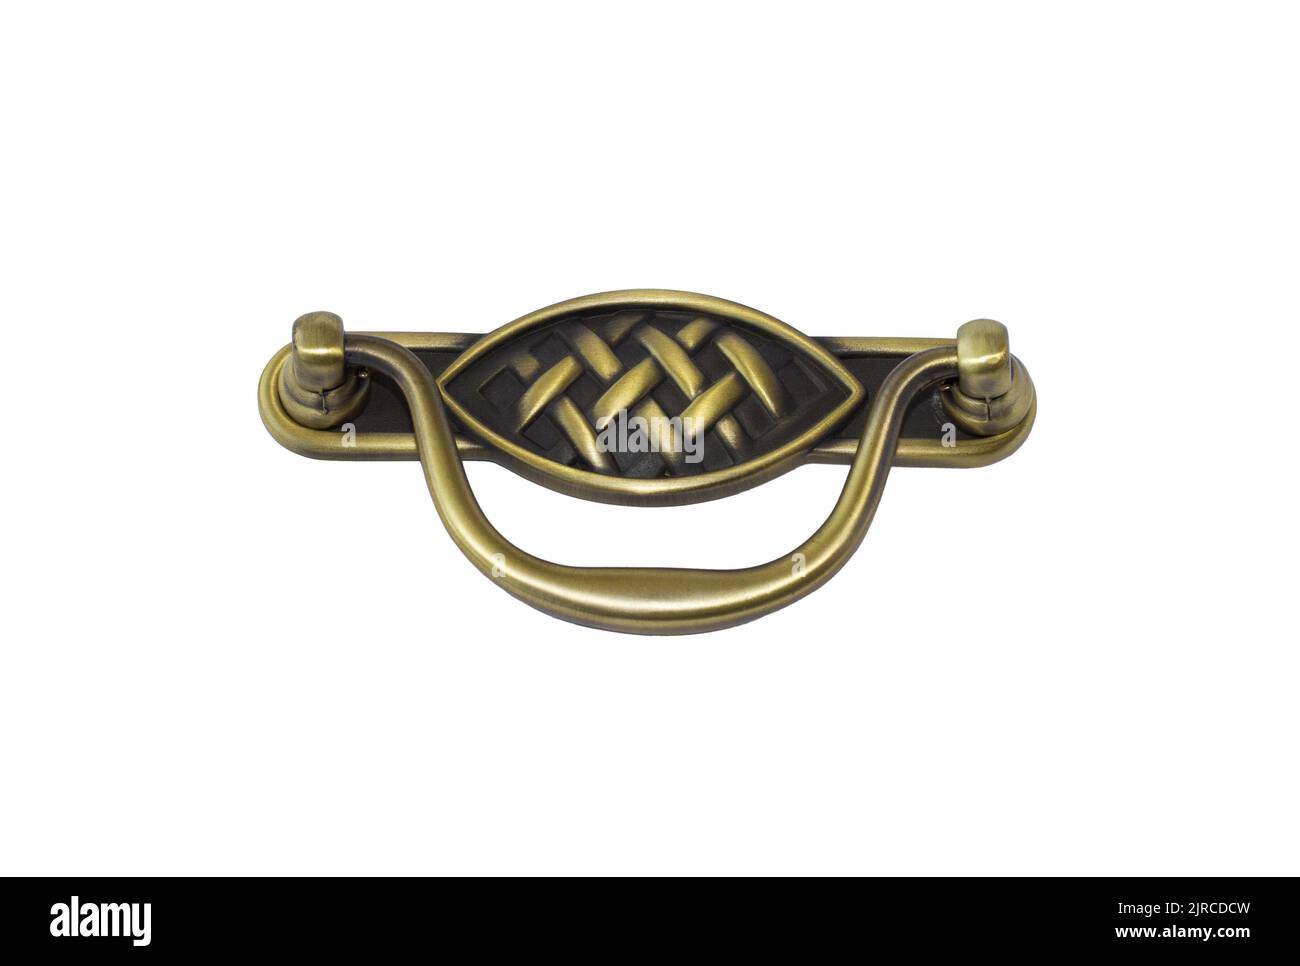 Retro metal door handle for furniture, in exquisite ancient style against a white background Stock Photo